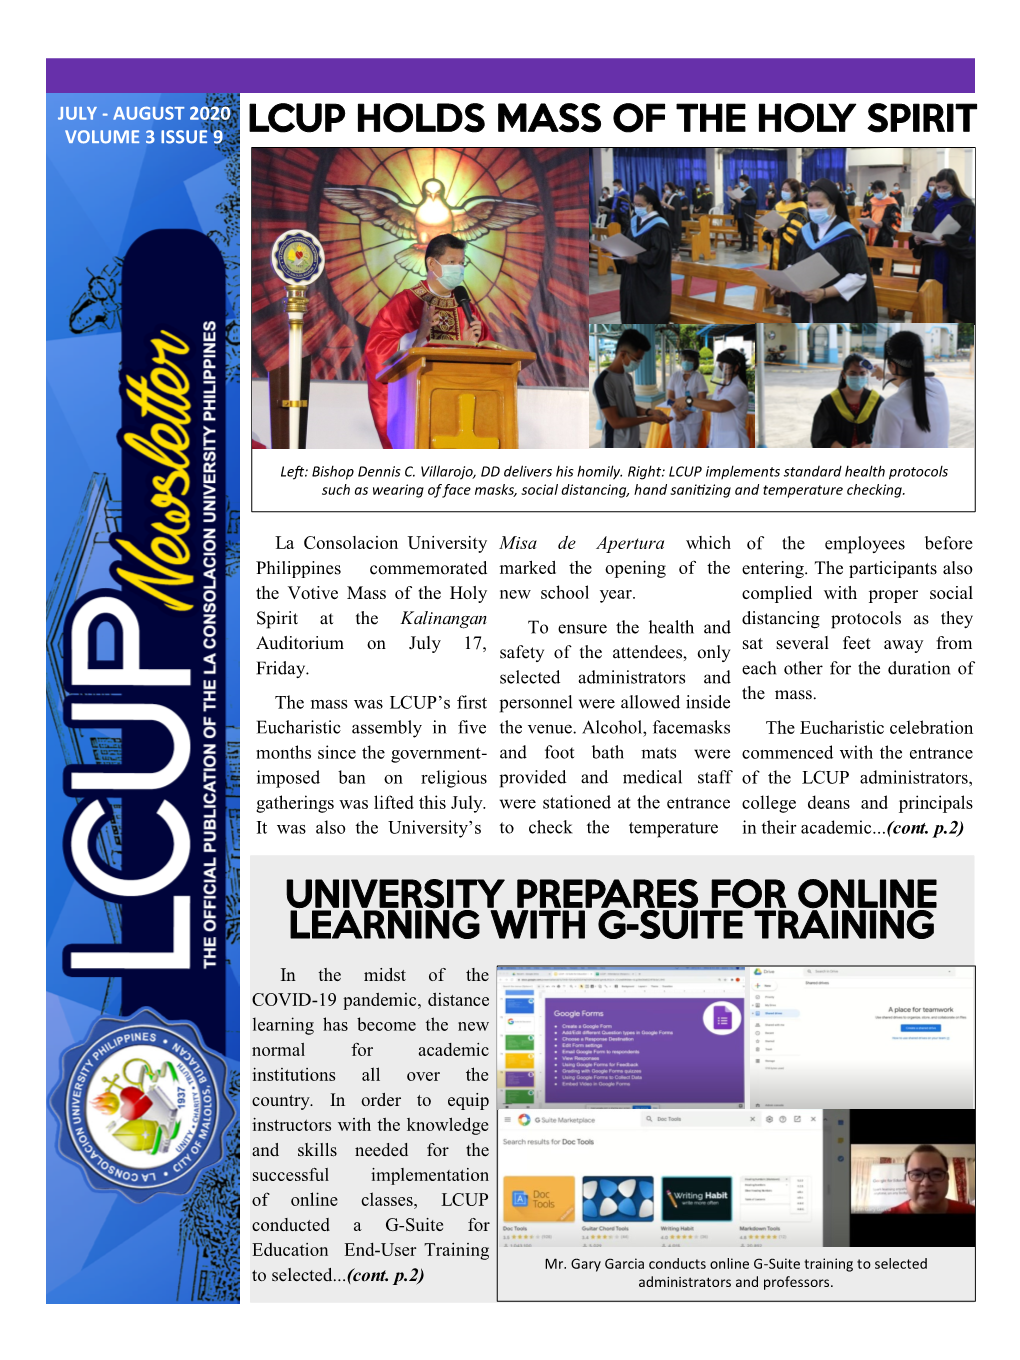 Lcup Holds Mass of the Holy Spirit University Prepares for Online Learning with G-Suite Training